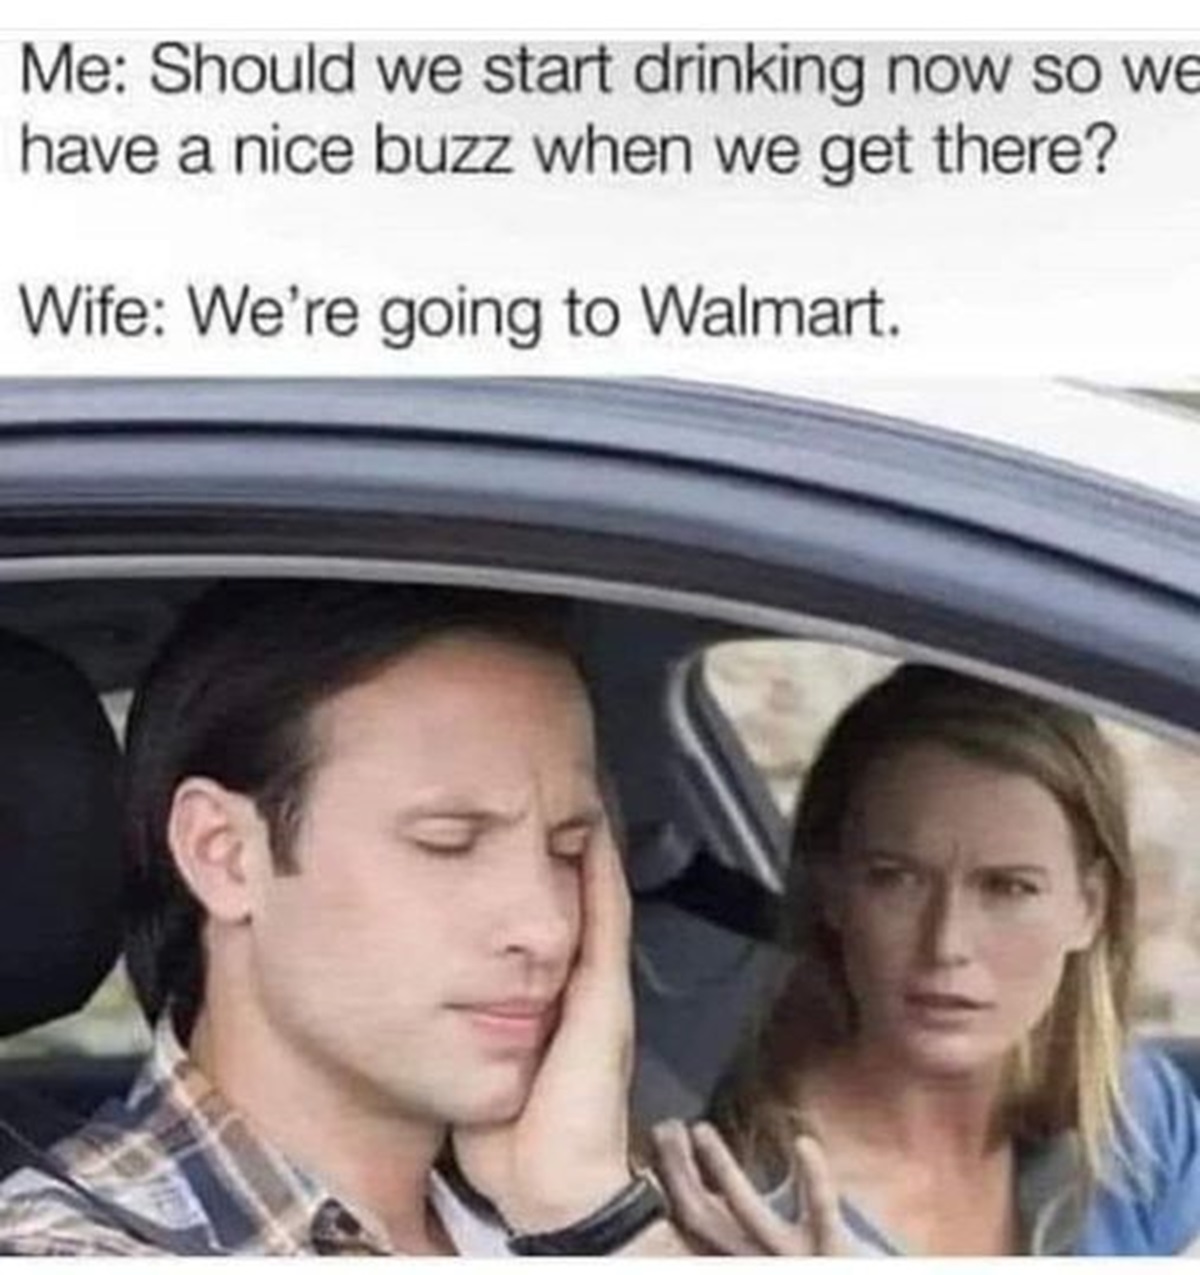 argument in car - Me Should we start drinking now so we have a nice buzz when we get there? Wife We're going to Walmart.